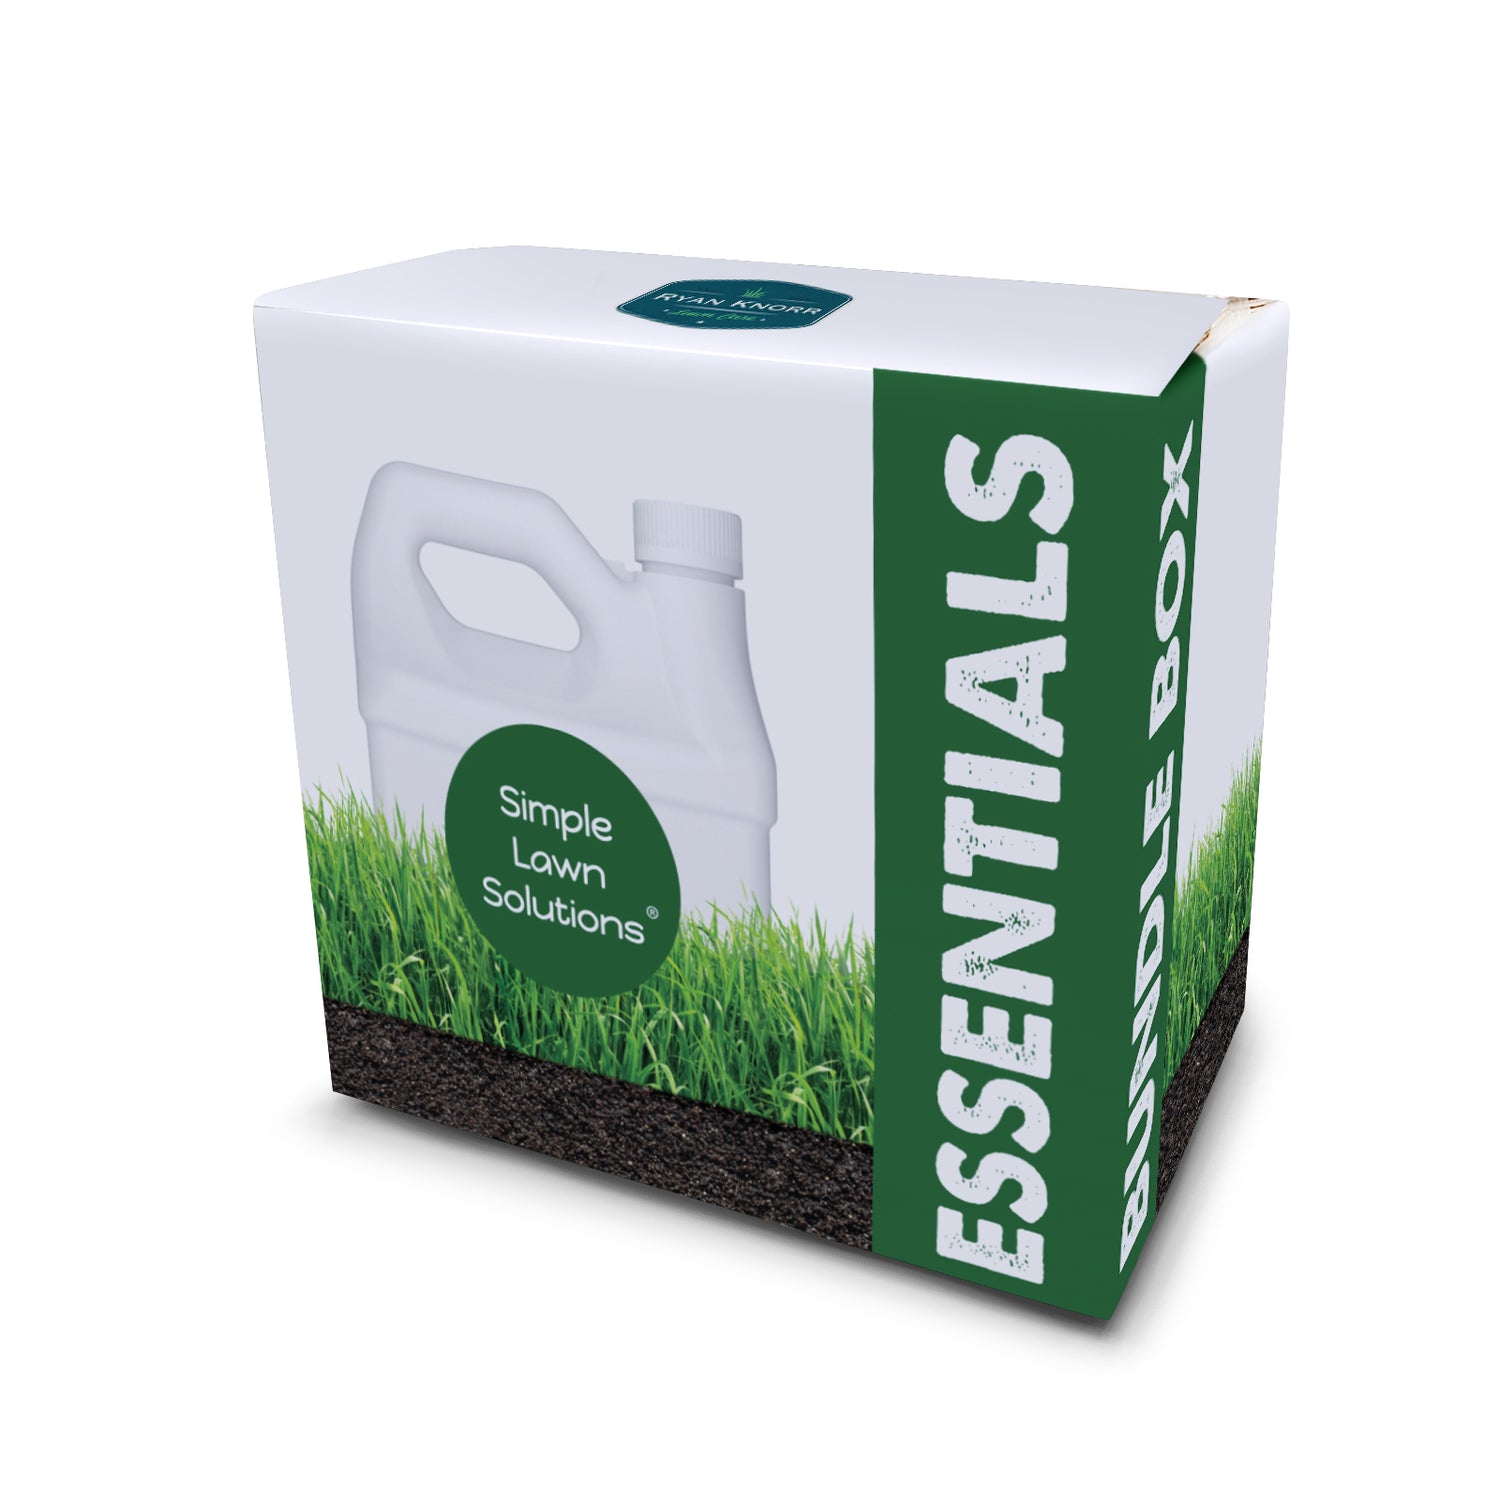 Simple Lawn Solutions essentials